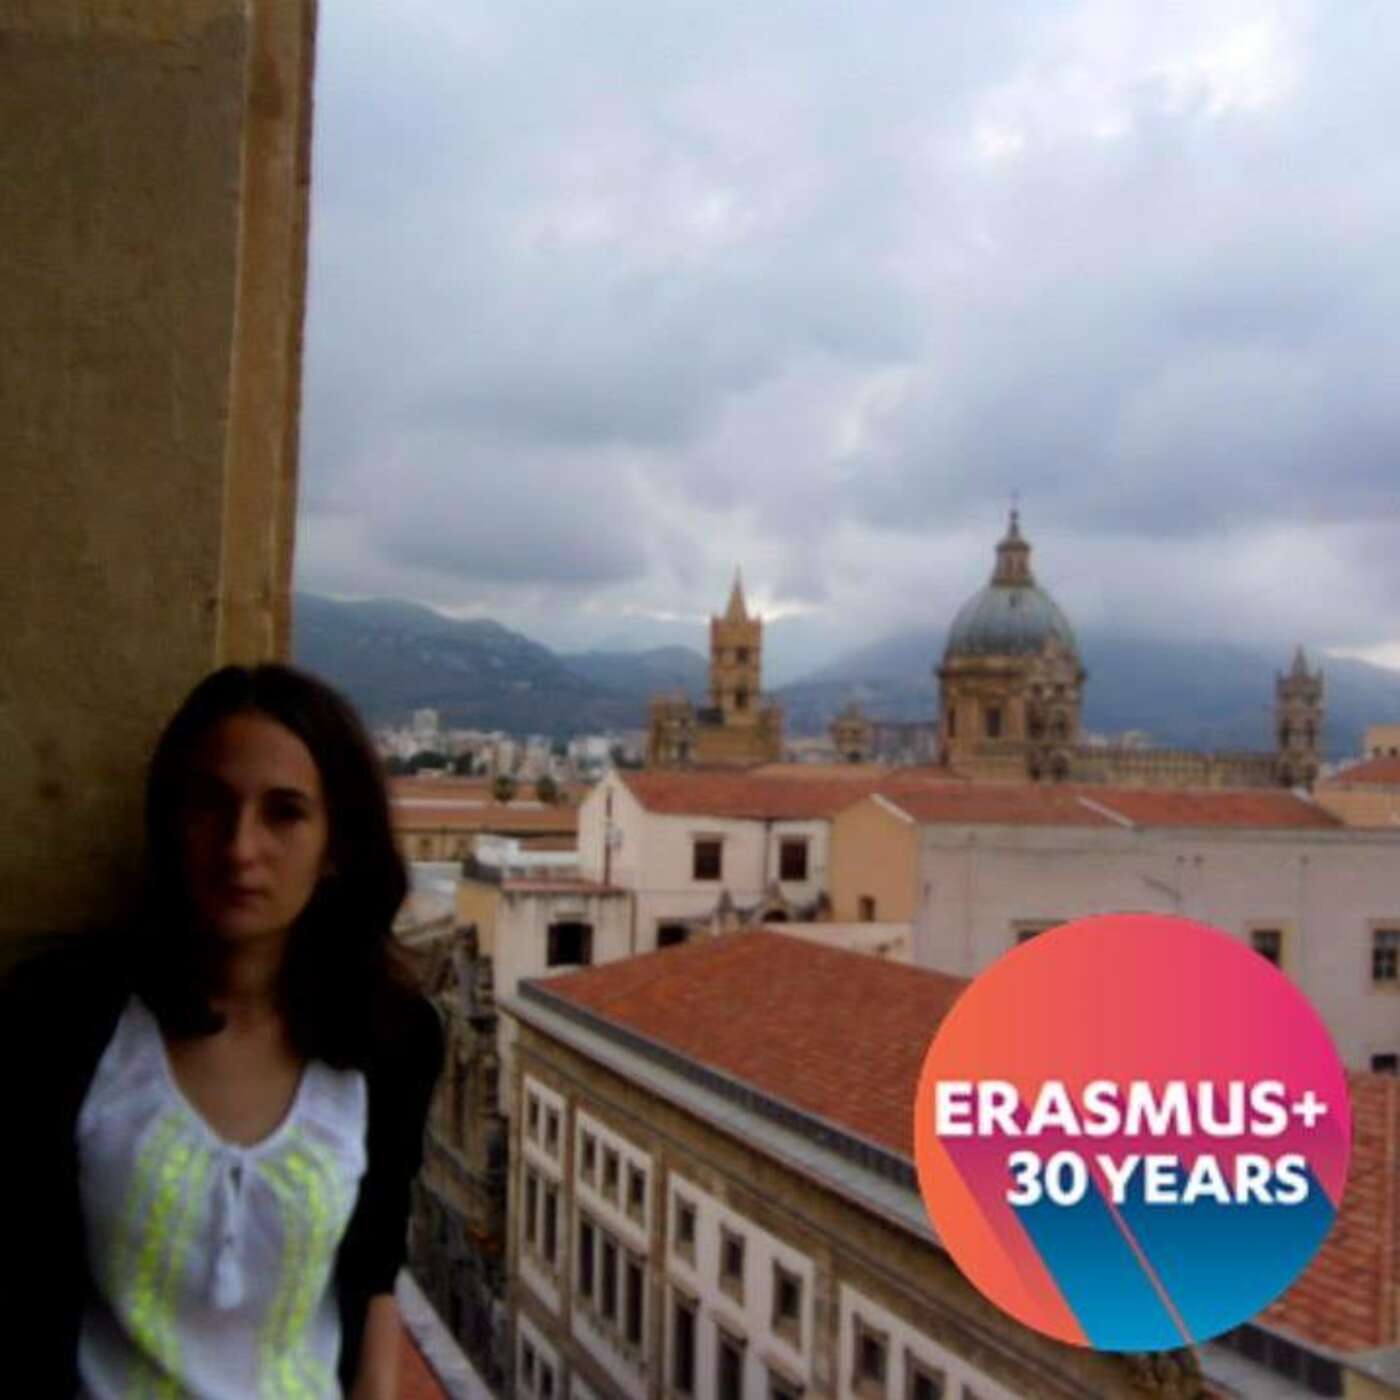 The best times will always be Erasmus times